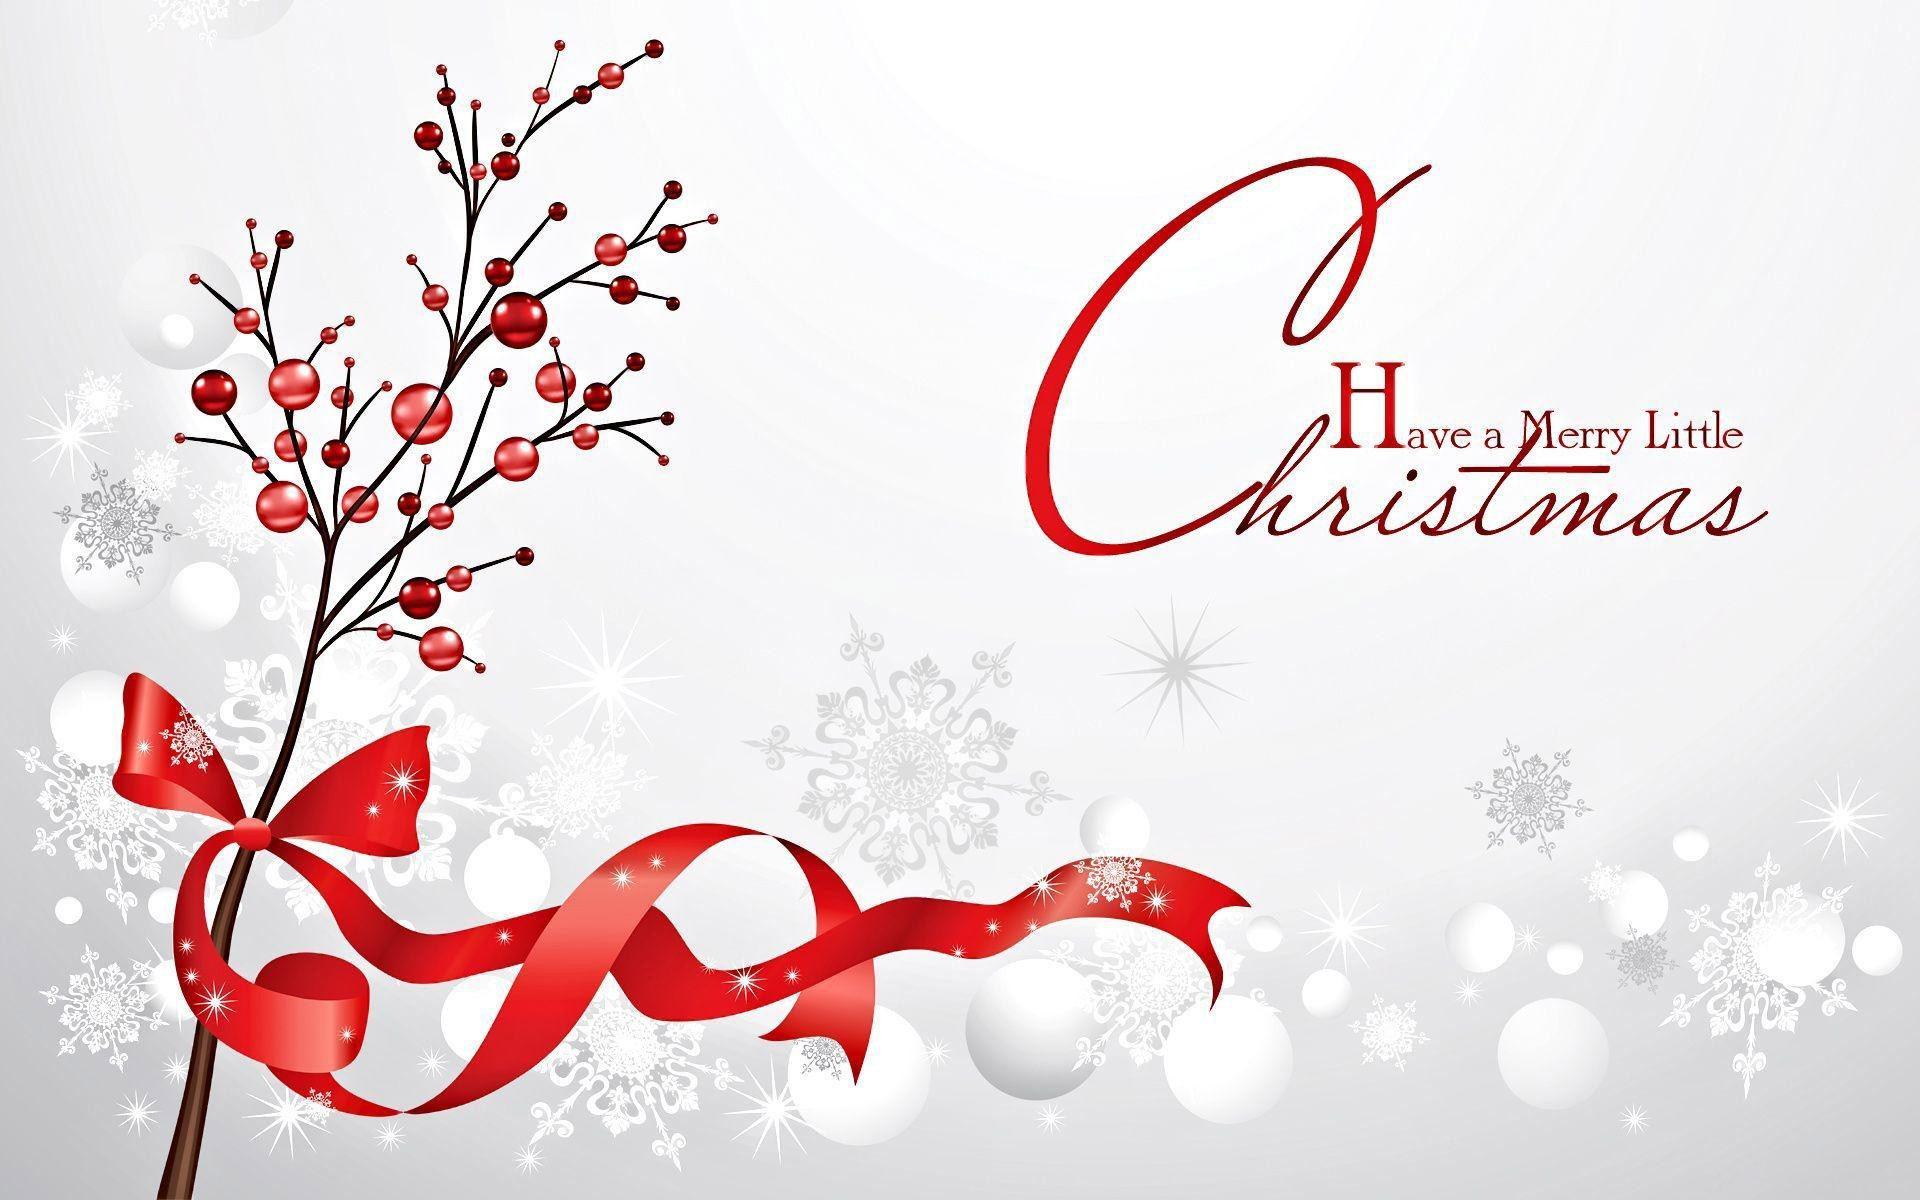 White Red Merry Christmas HD Wallpaper free desktop background and wallpaper